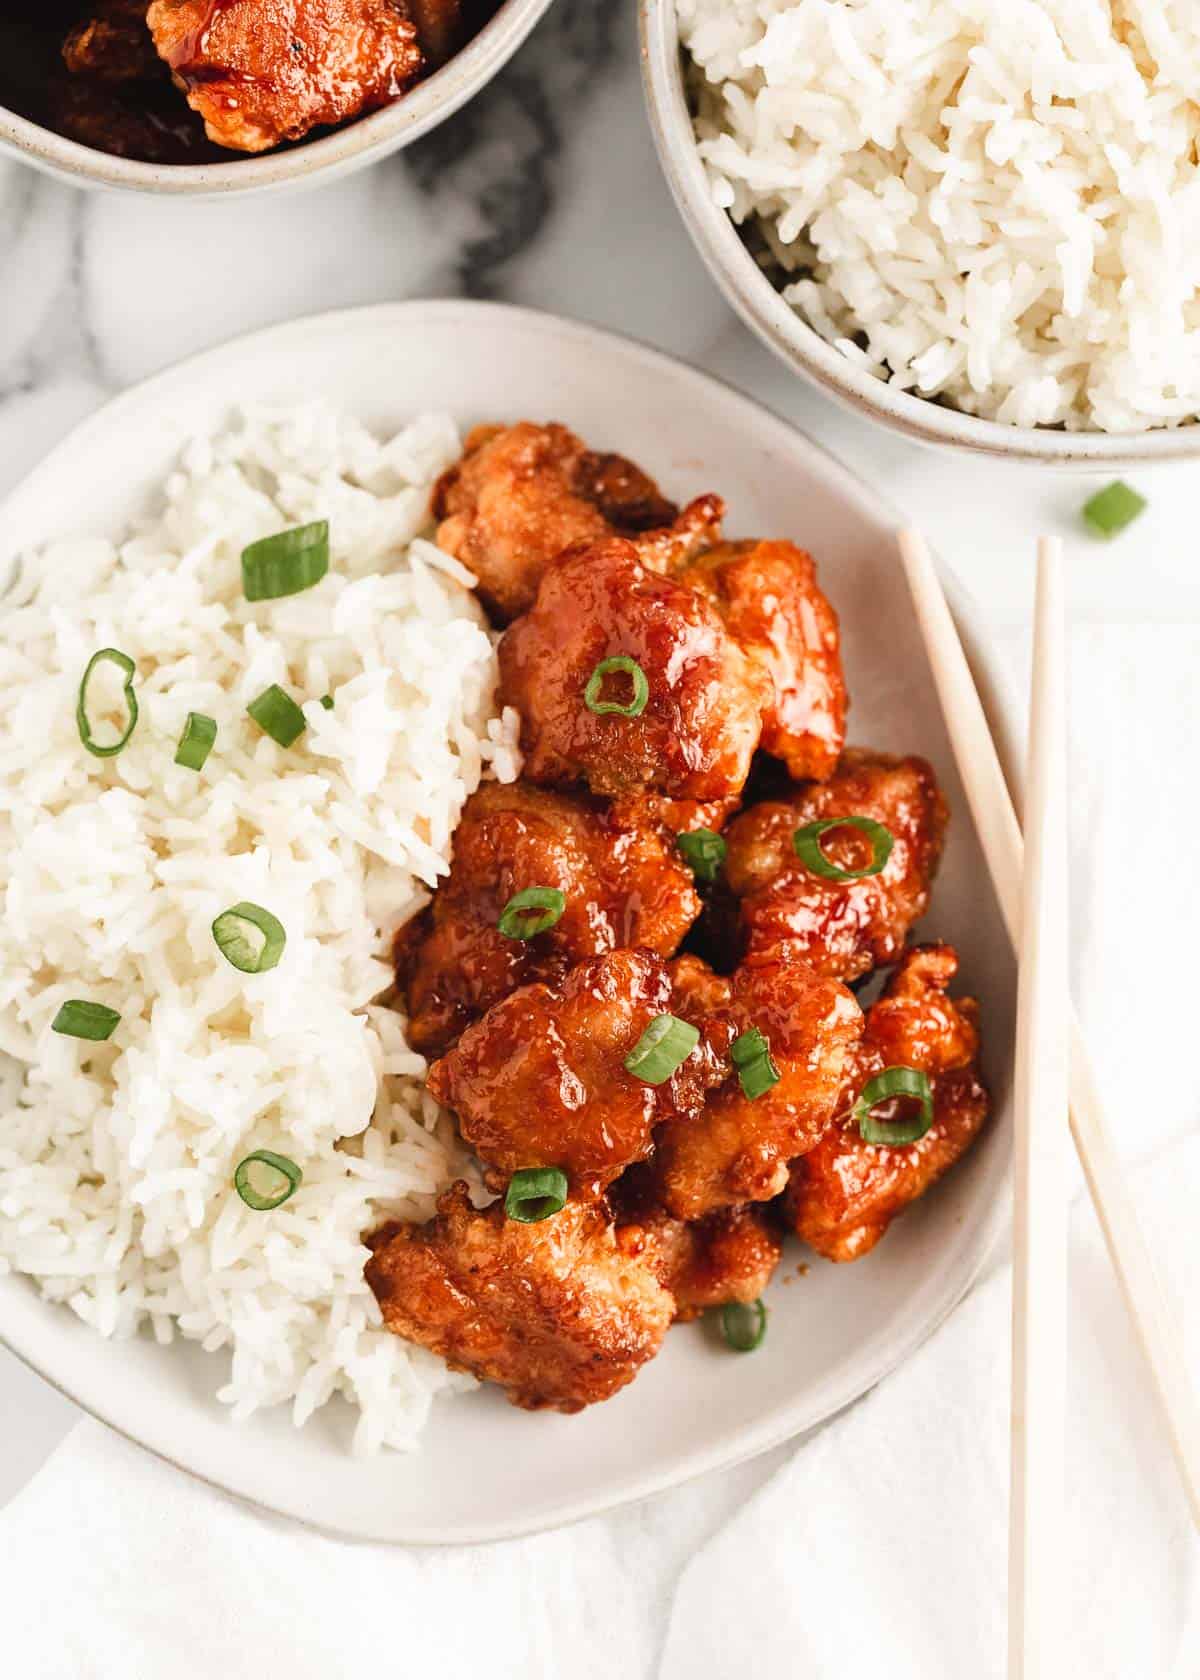 Bowl of sweet and sour chicken over rice.